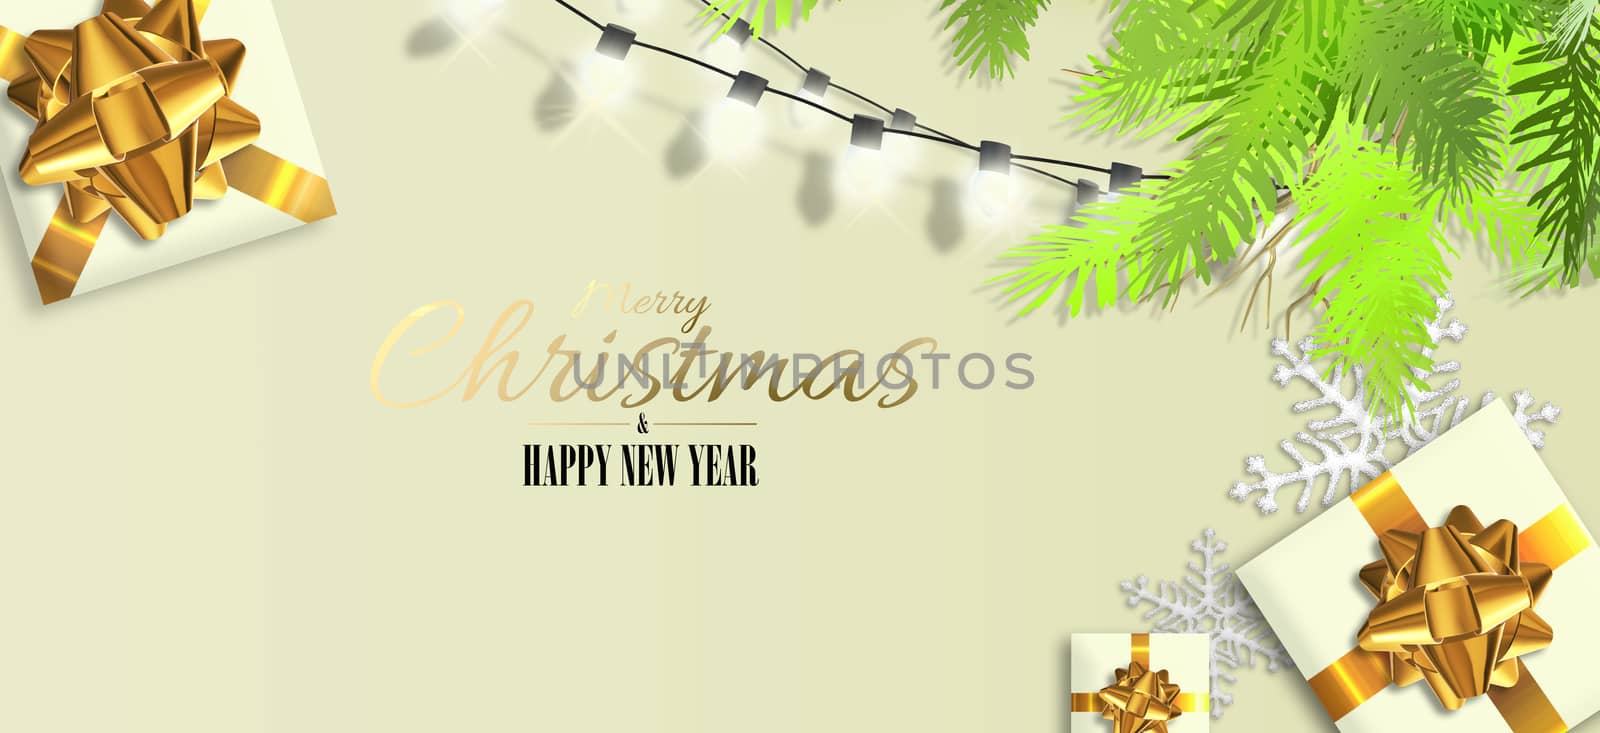 Chrisymas New Year banner in realistic 3D illustration. Xmas gift box, golden bow, lights, Xmas fir, gold shiny text Merry Christmas Happy New Year on pastel light background. Horizontal card, header